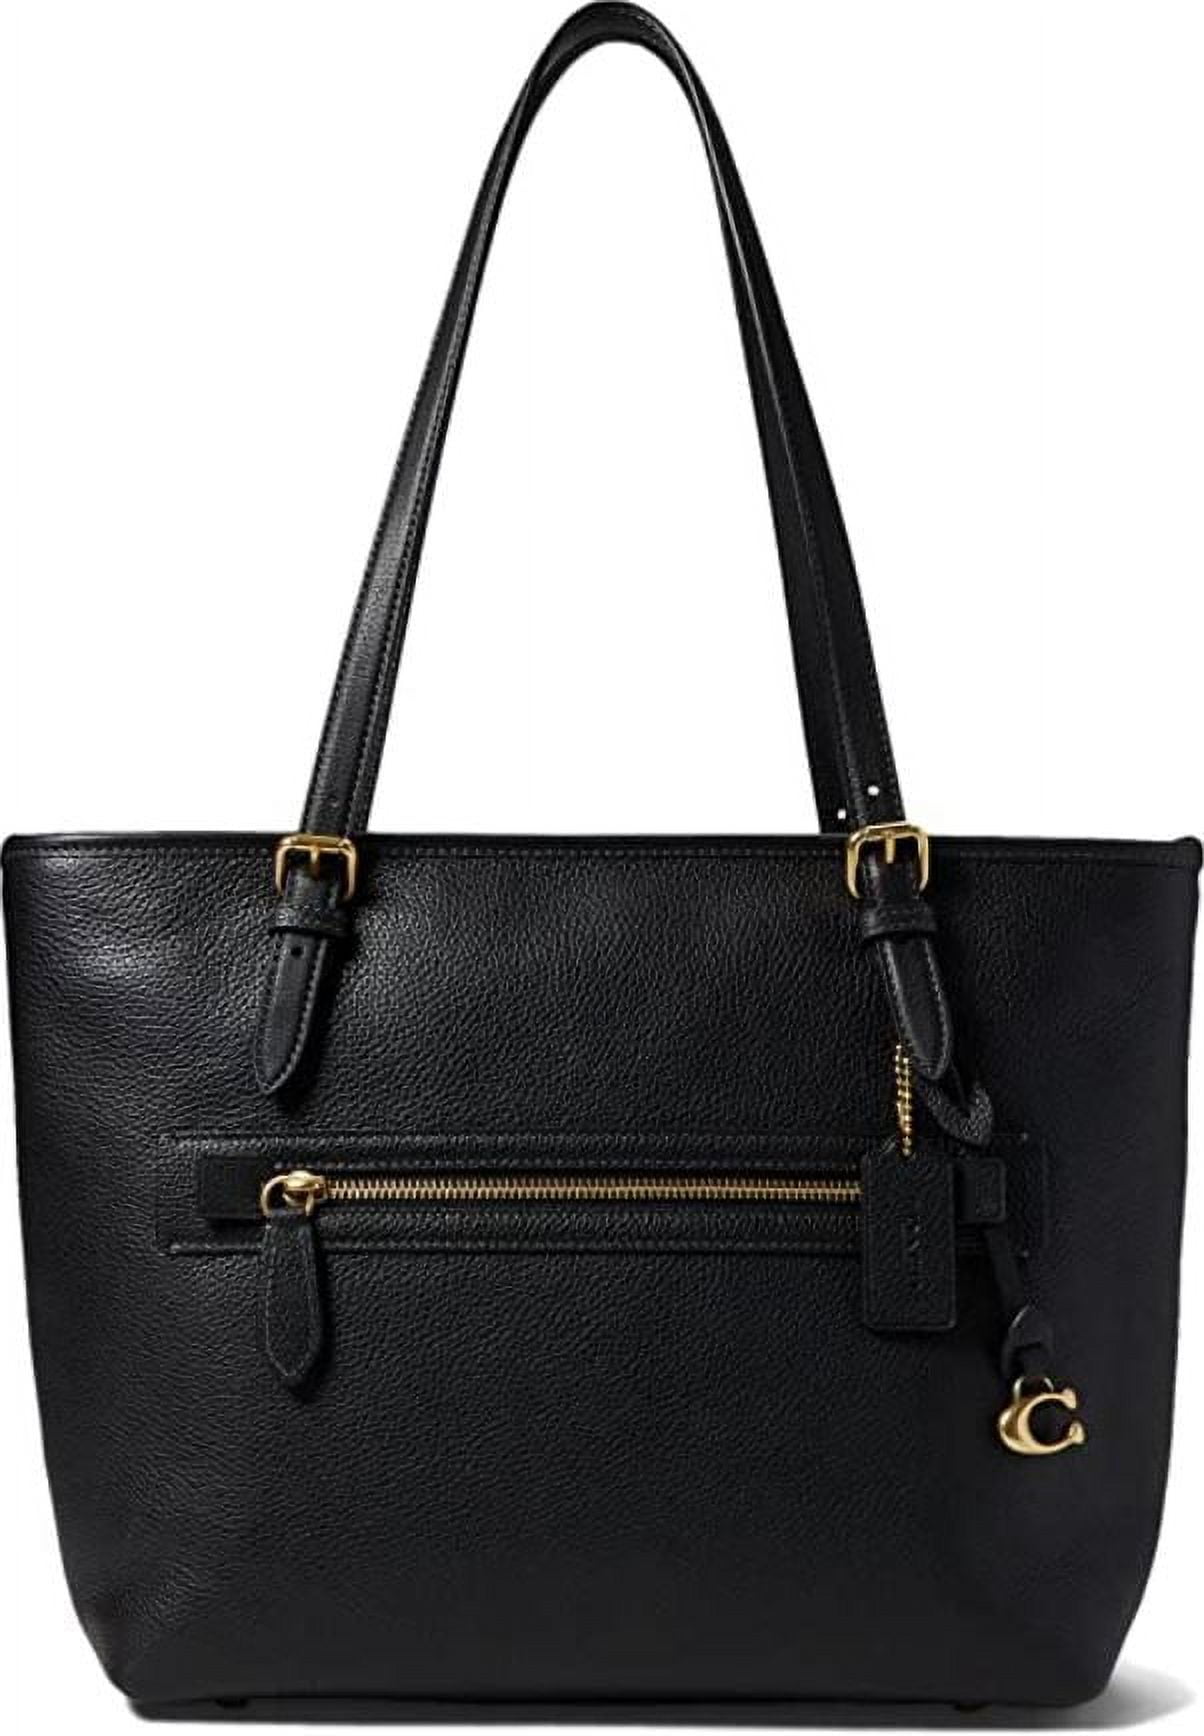 COACH Womens Polished Pebble Leather Taylor Tote Black CC395-B4/BK One Size  